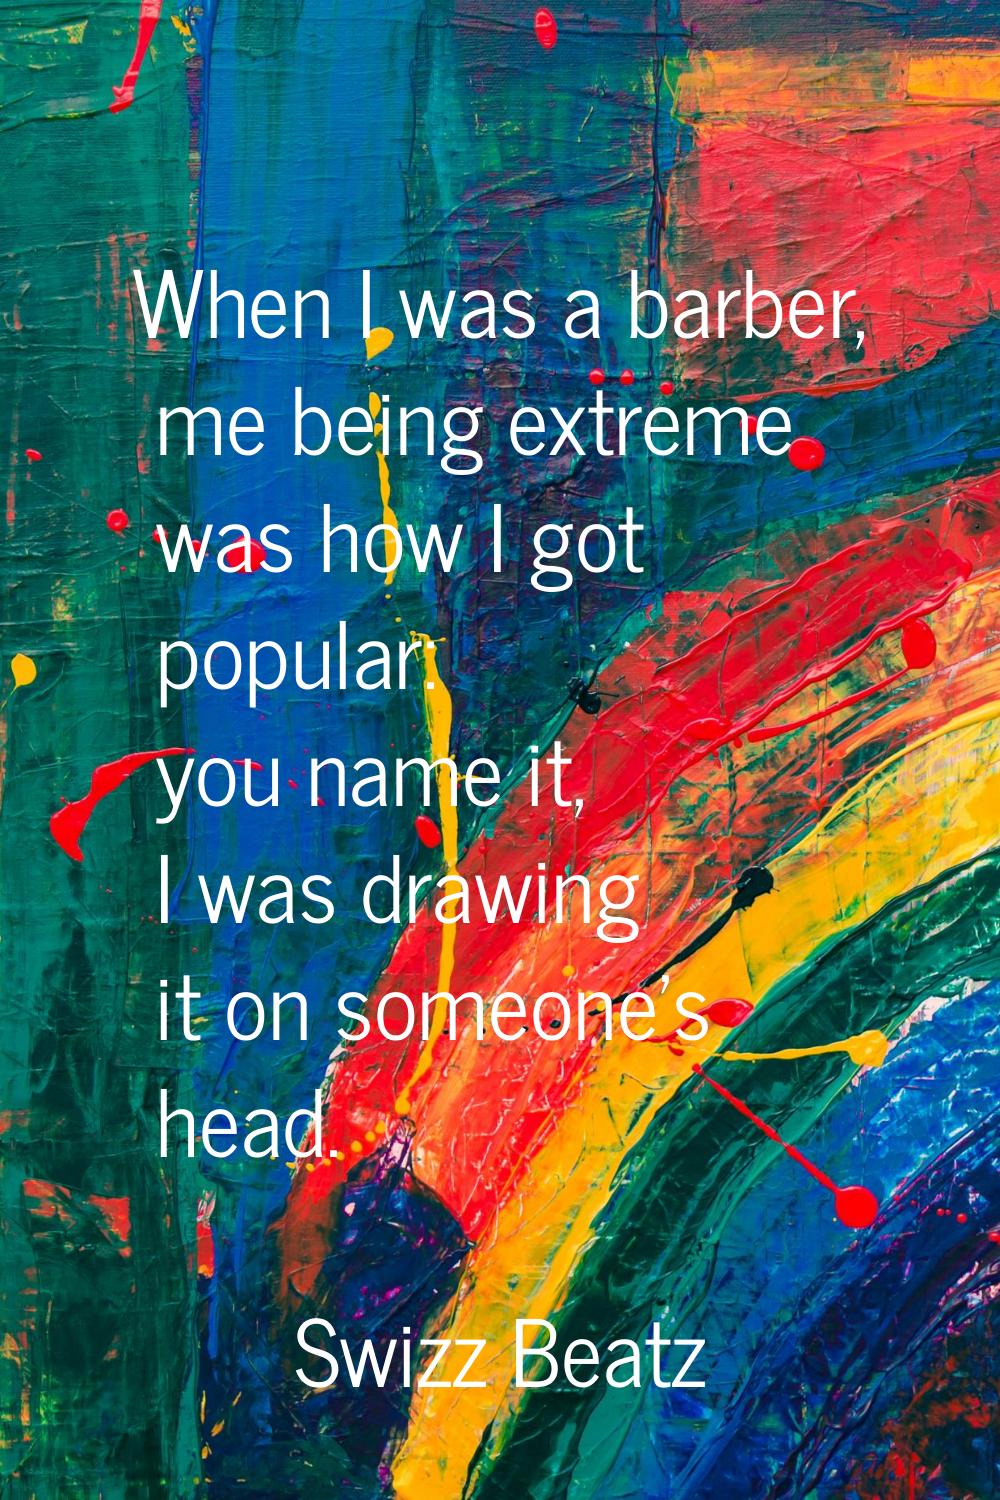 When I was a barber, me being extreme was how I got popular: you name it, I was drawing it on someo